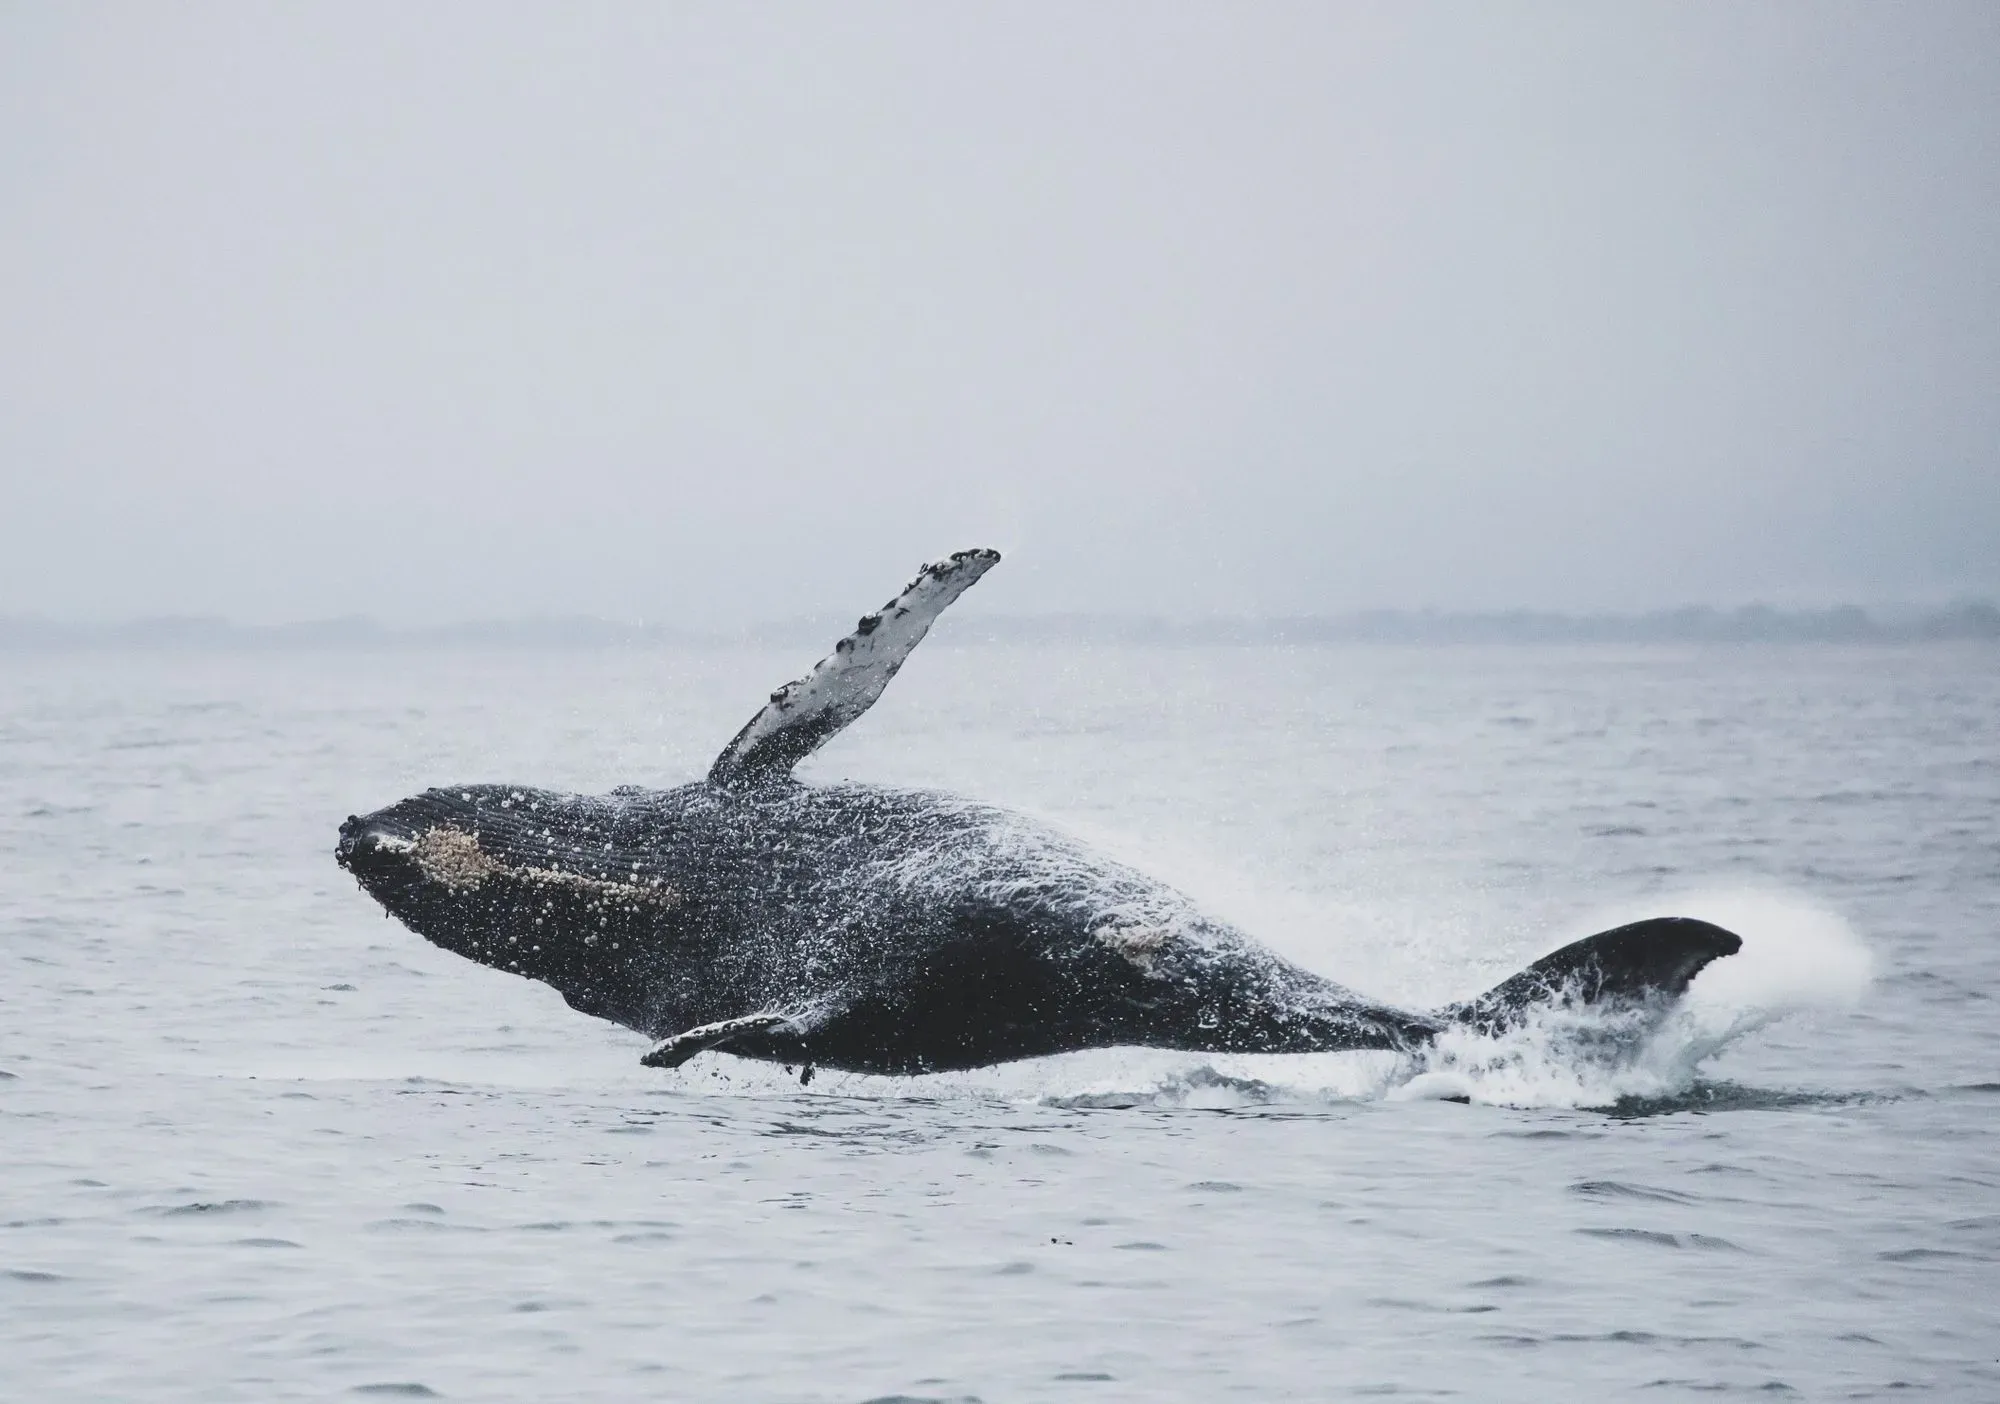 Whale facts include whales can shoot milk more than 2.64 gal (12 l) in just a few seconds.